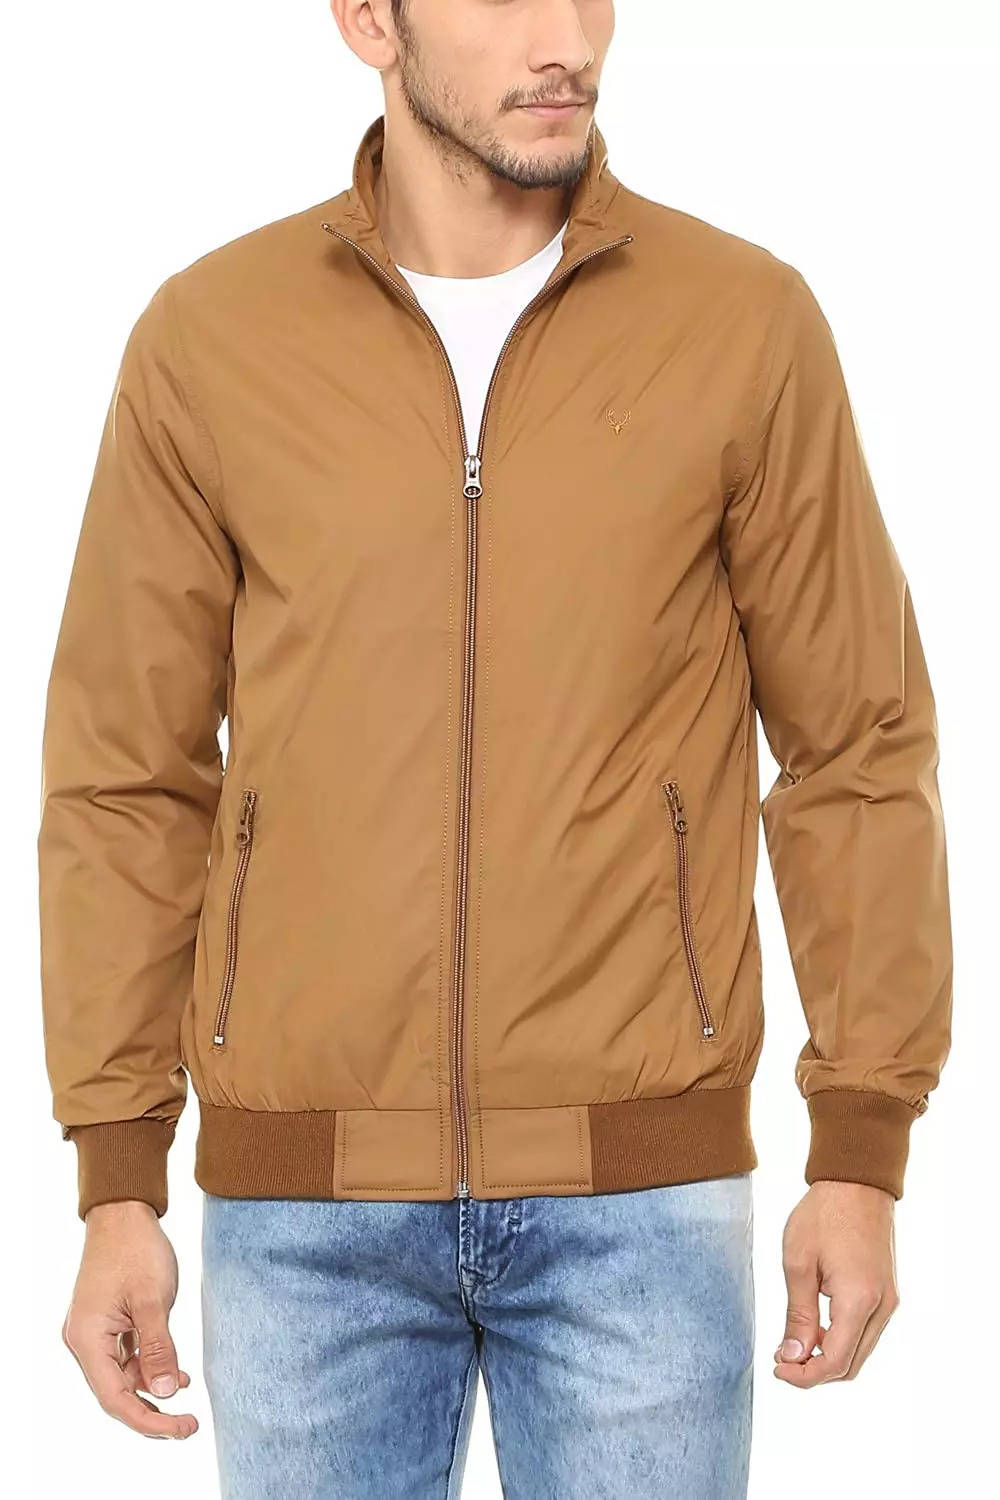 Buy Allen Solly Men Grey Solid Bomber jacket Online at Low Prices in India  - Paytmmall.com